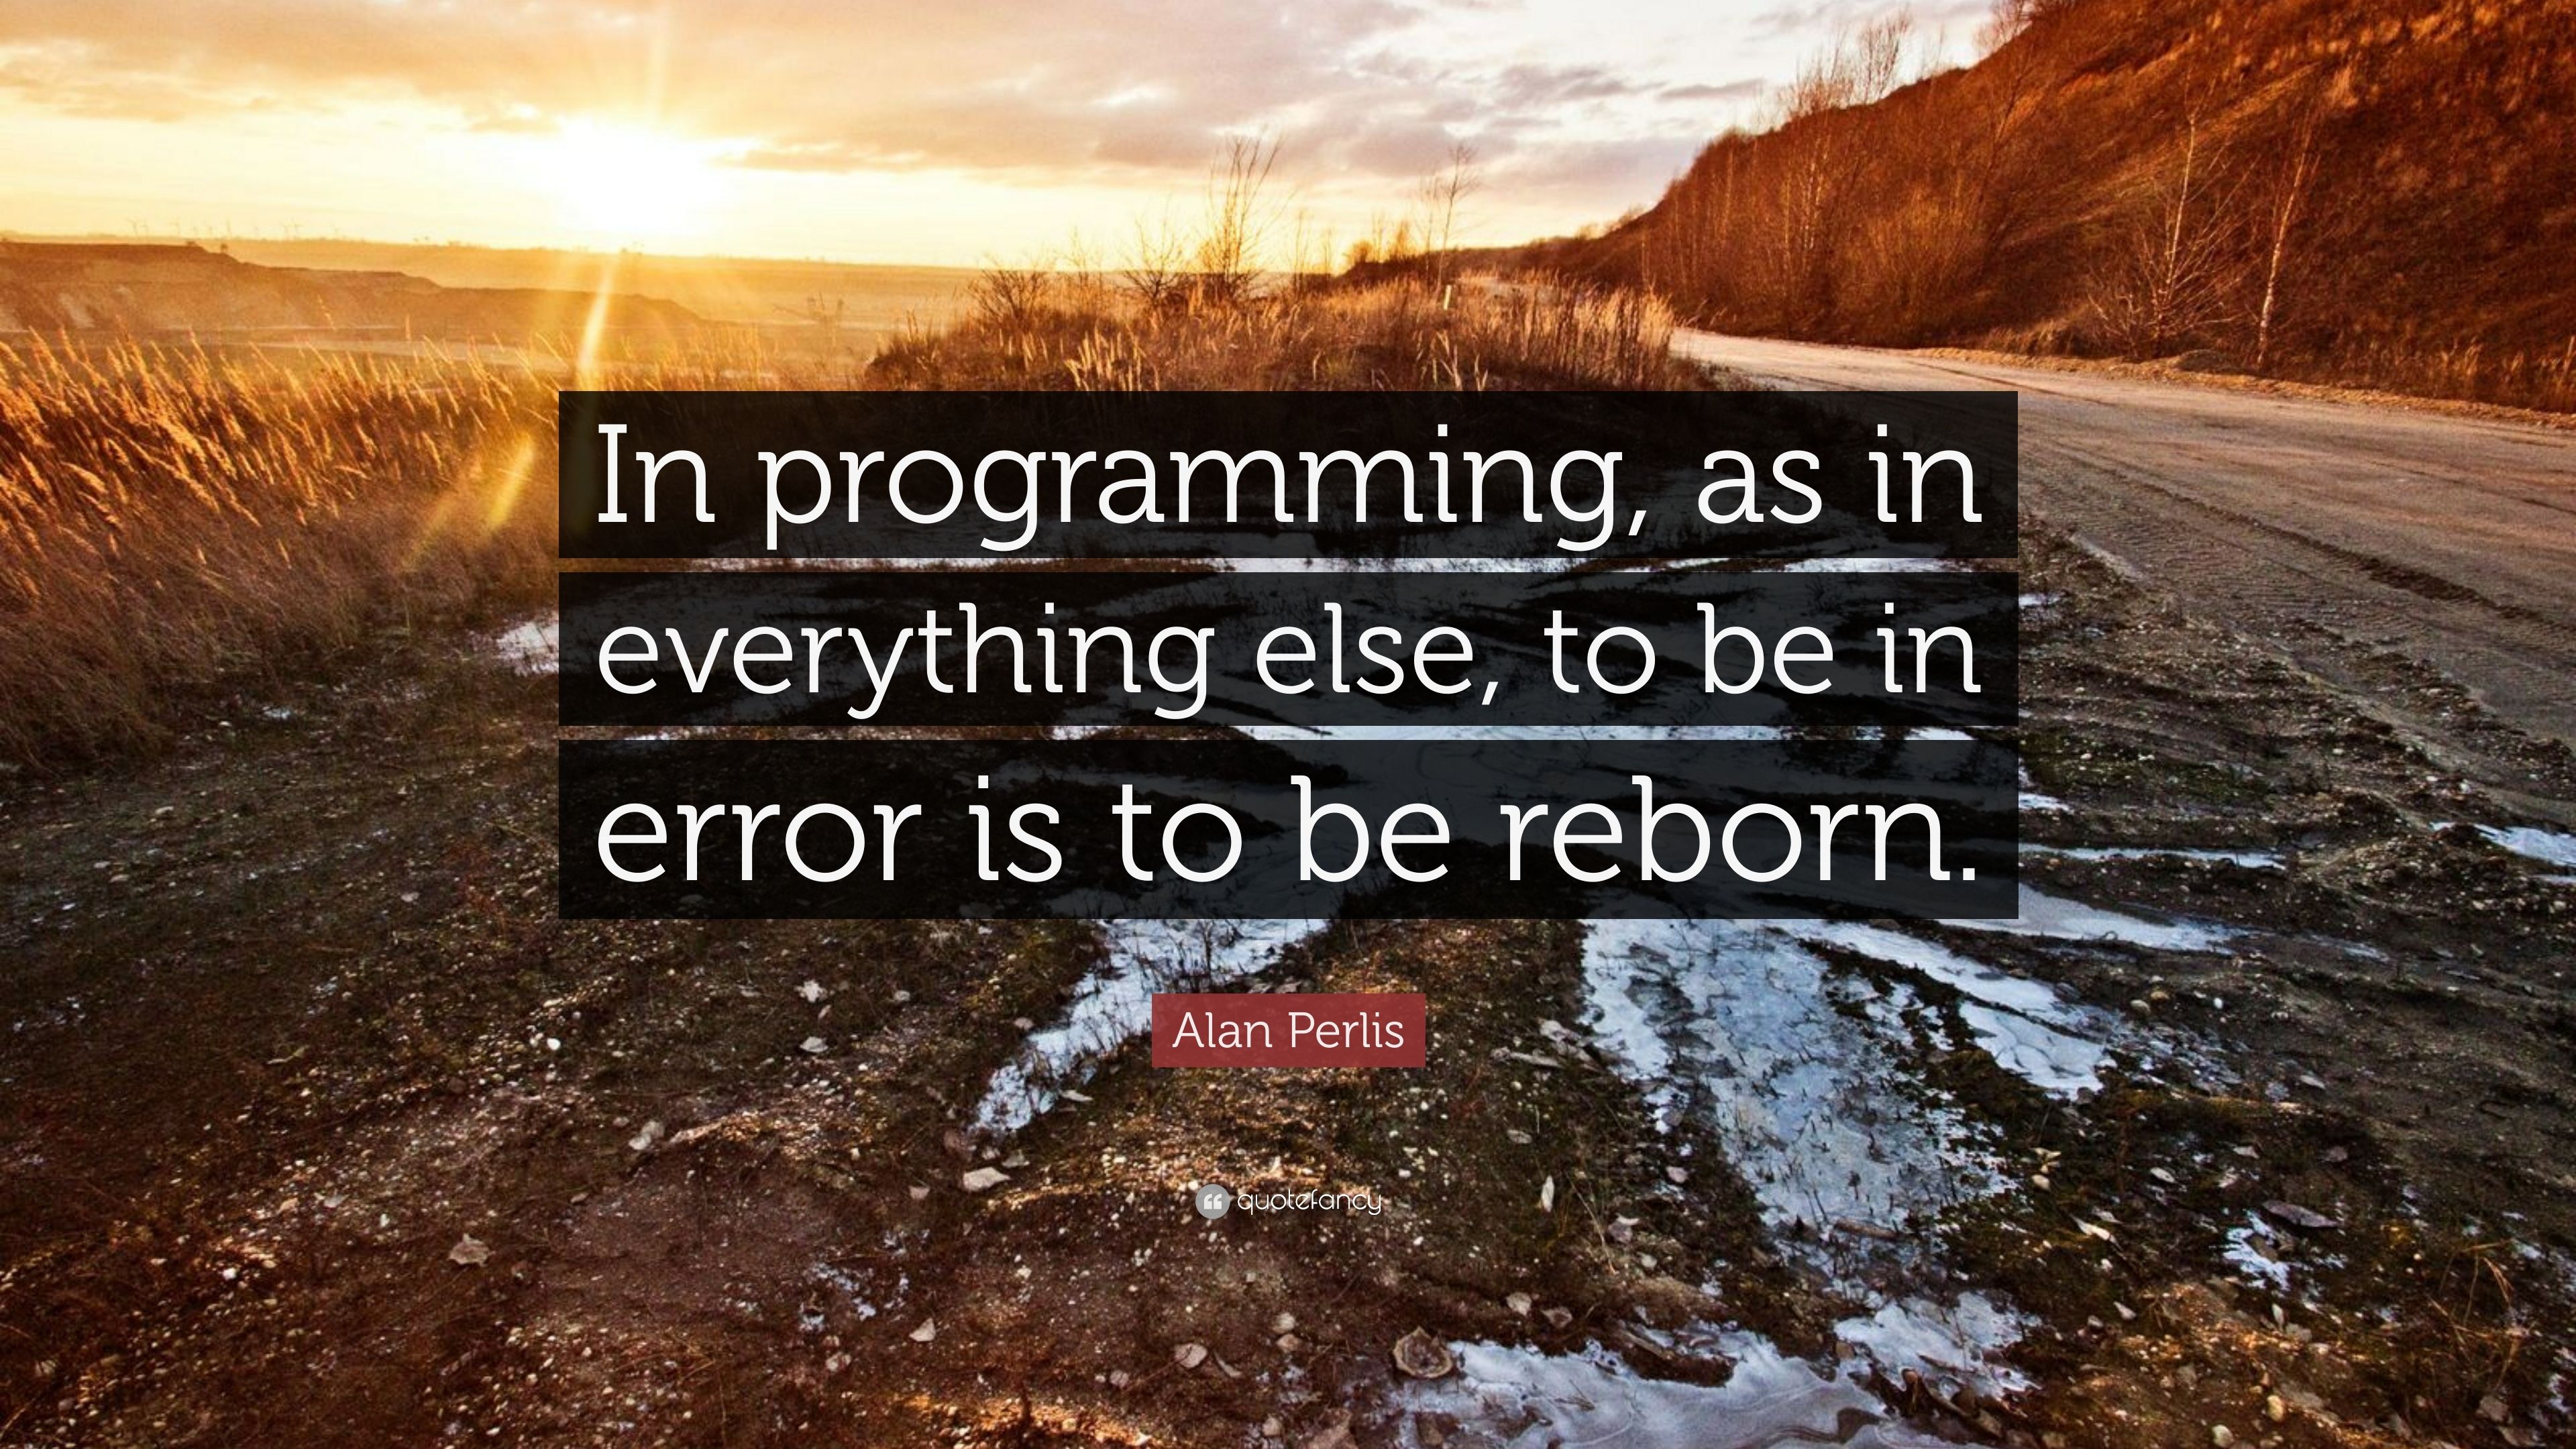 Alan Perlis Quote: “In programming, as in everything else, to be